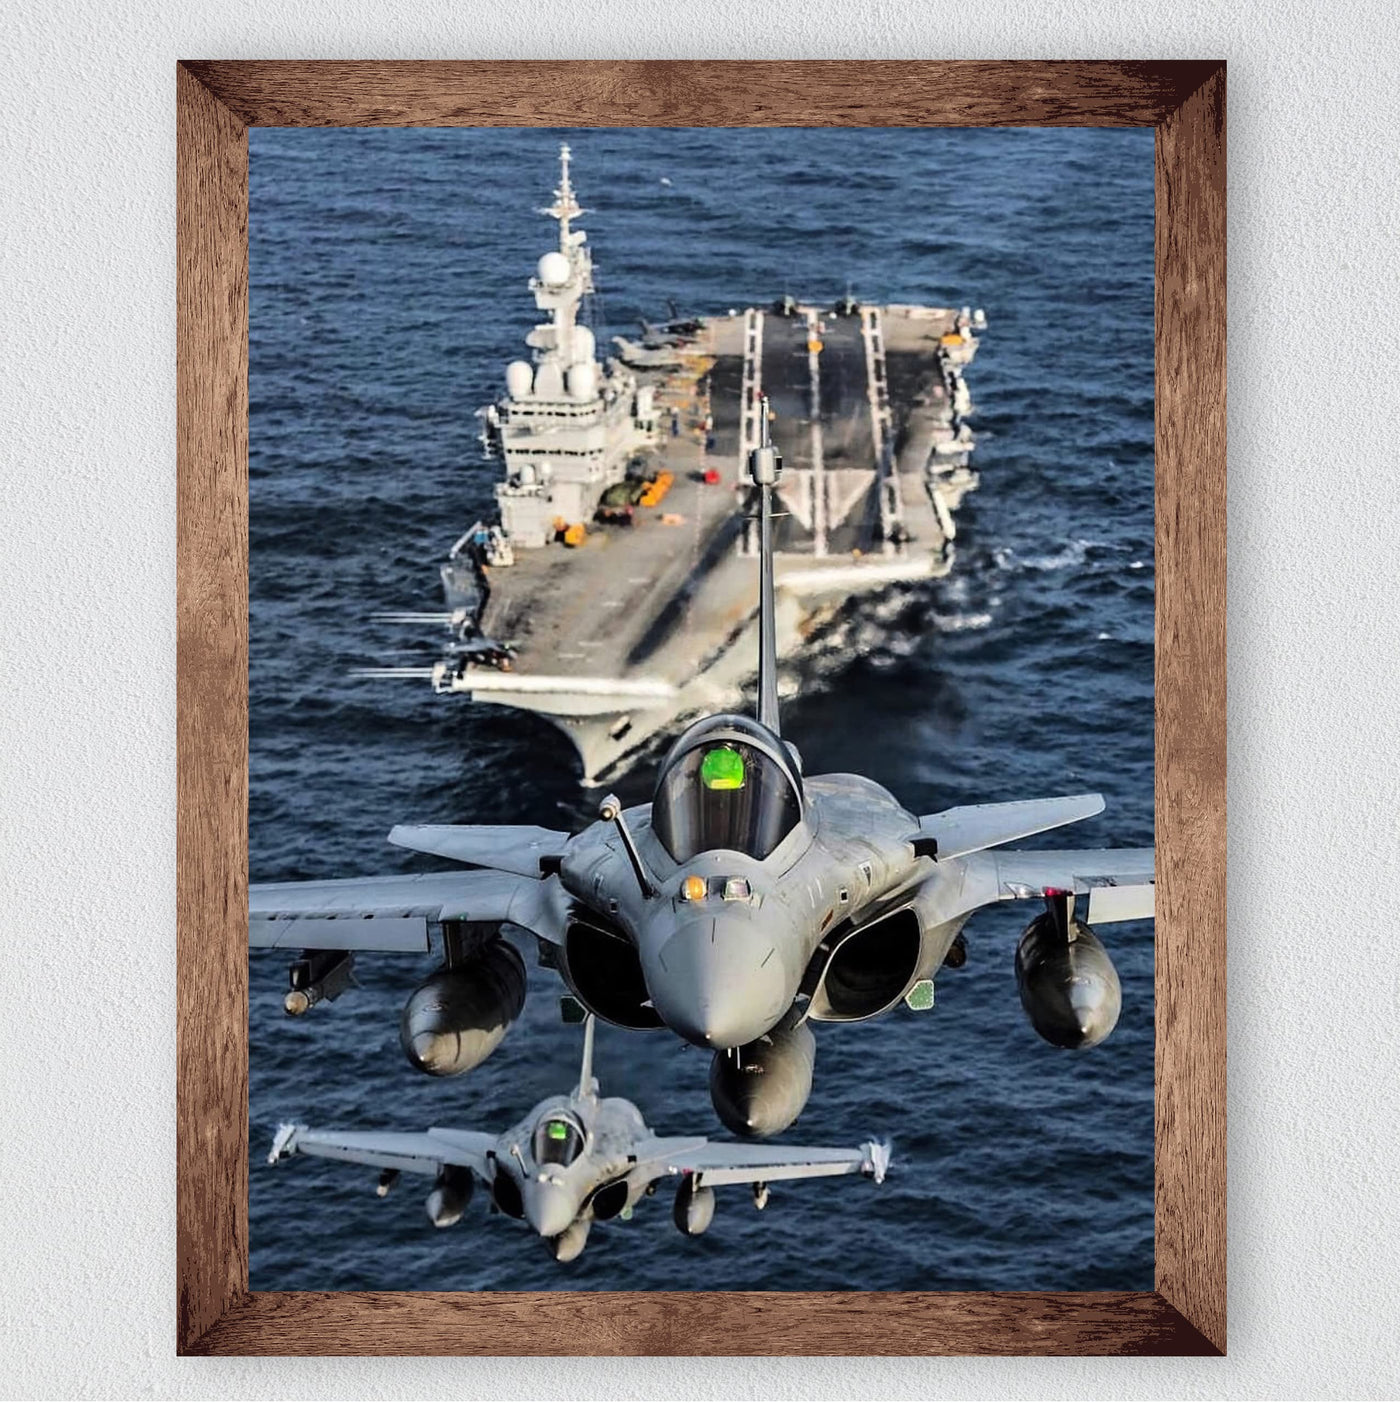 Dassault Rafale Taking Off From Aircraft Carrier -French Fighter Jet Print -8x10" Military Plane Wall Decor -Ready to Frame. Home-Office-School Decor. Perfect Sign for Game Room-Garage-Cave Decor!